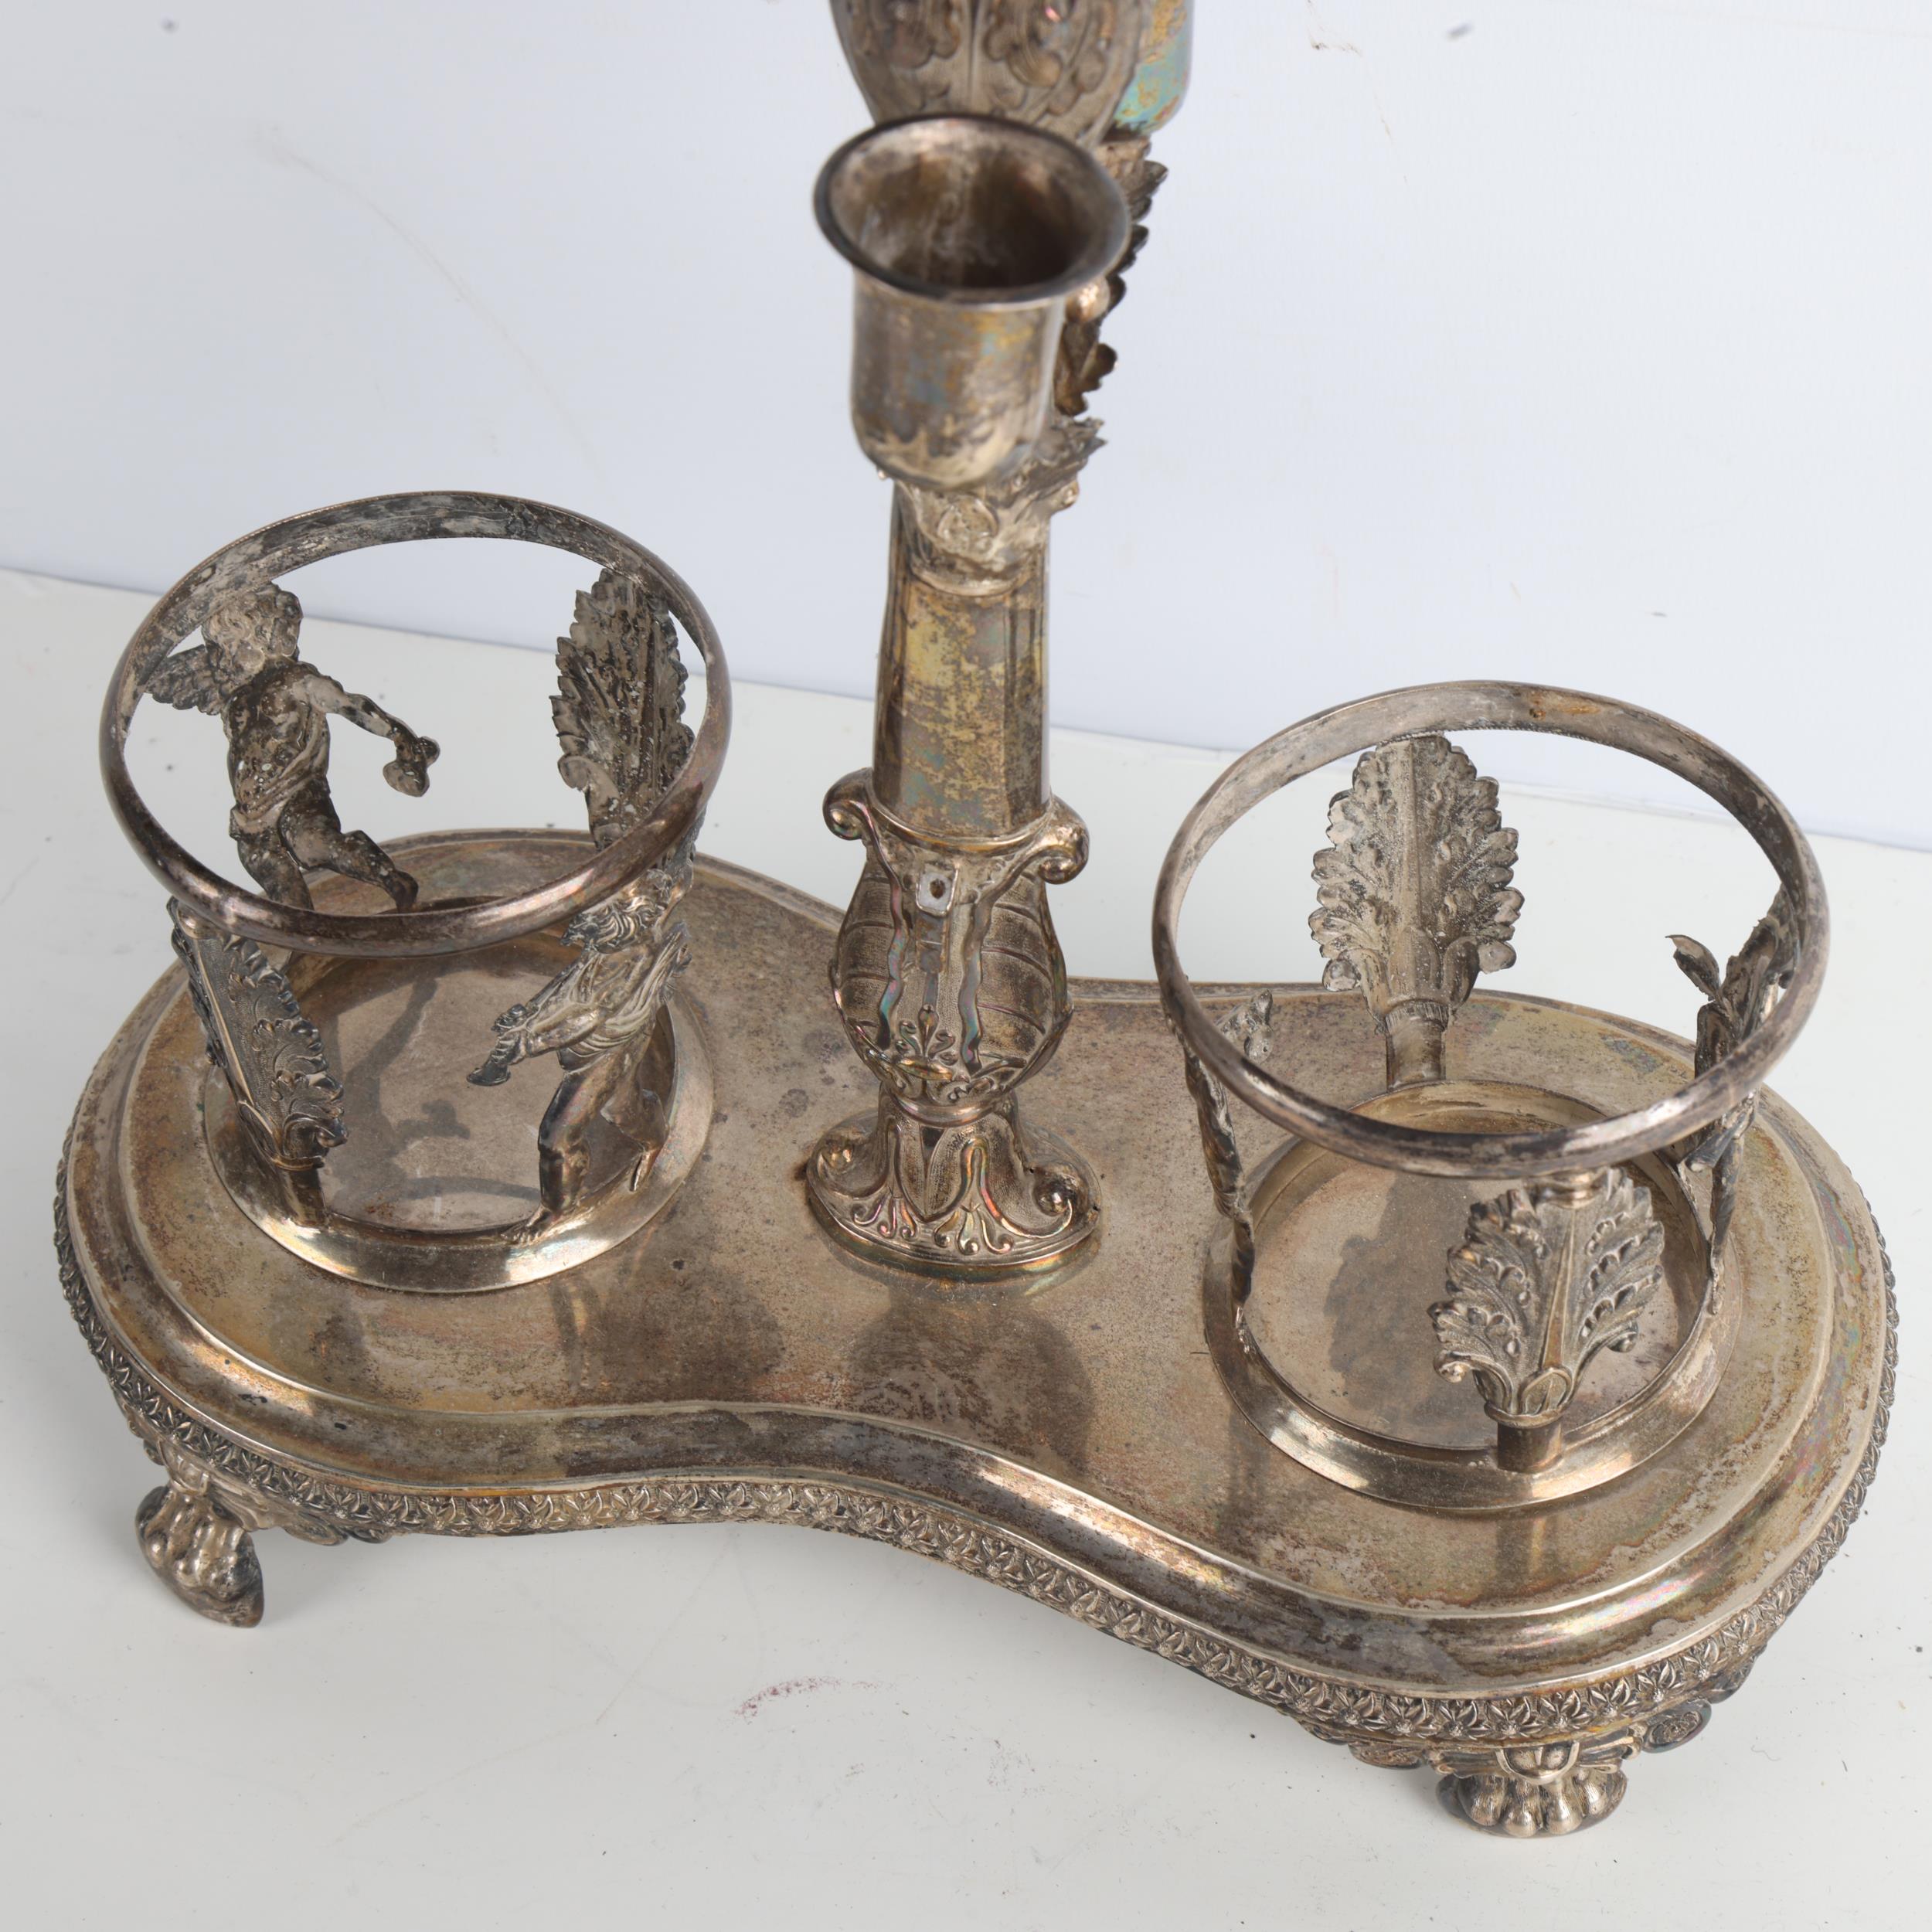 **WITHDRAWN** - A 19th century Continental silver Empire style oil and vinegar stand, - Image 3 of 3